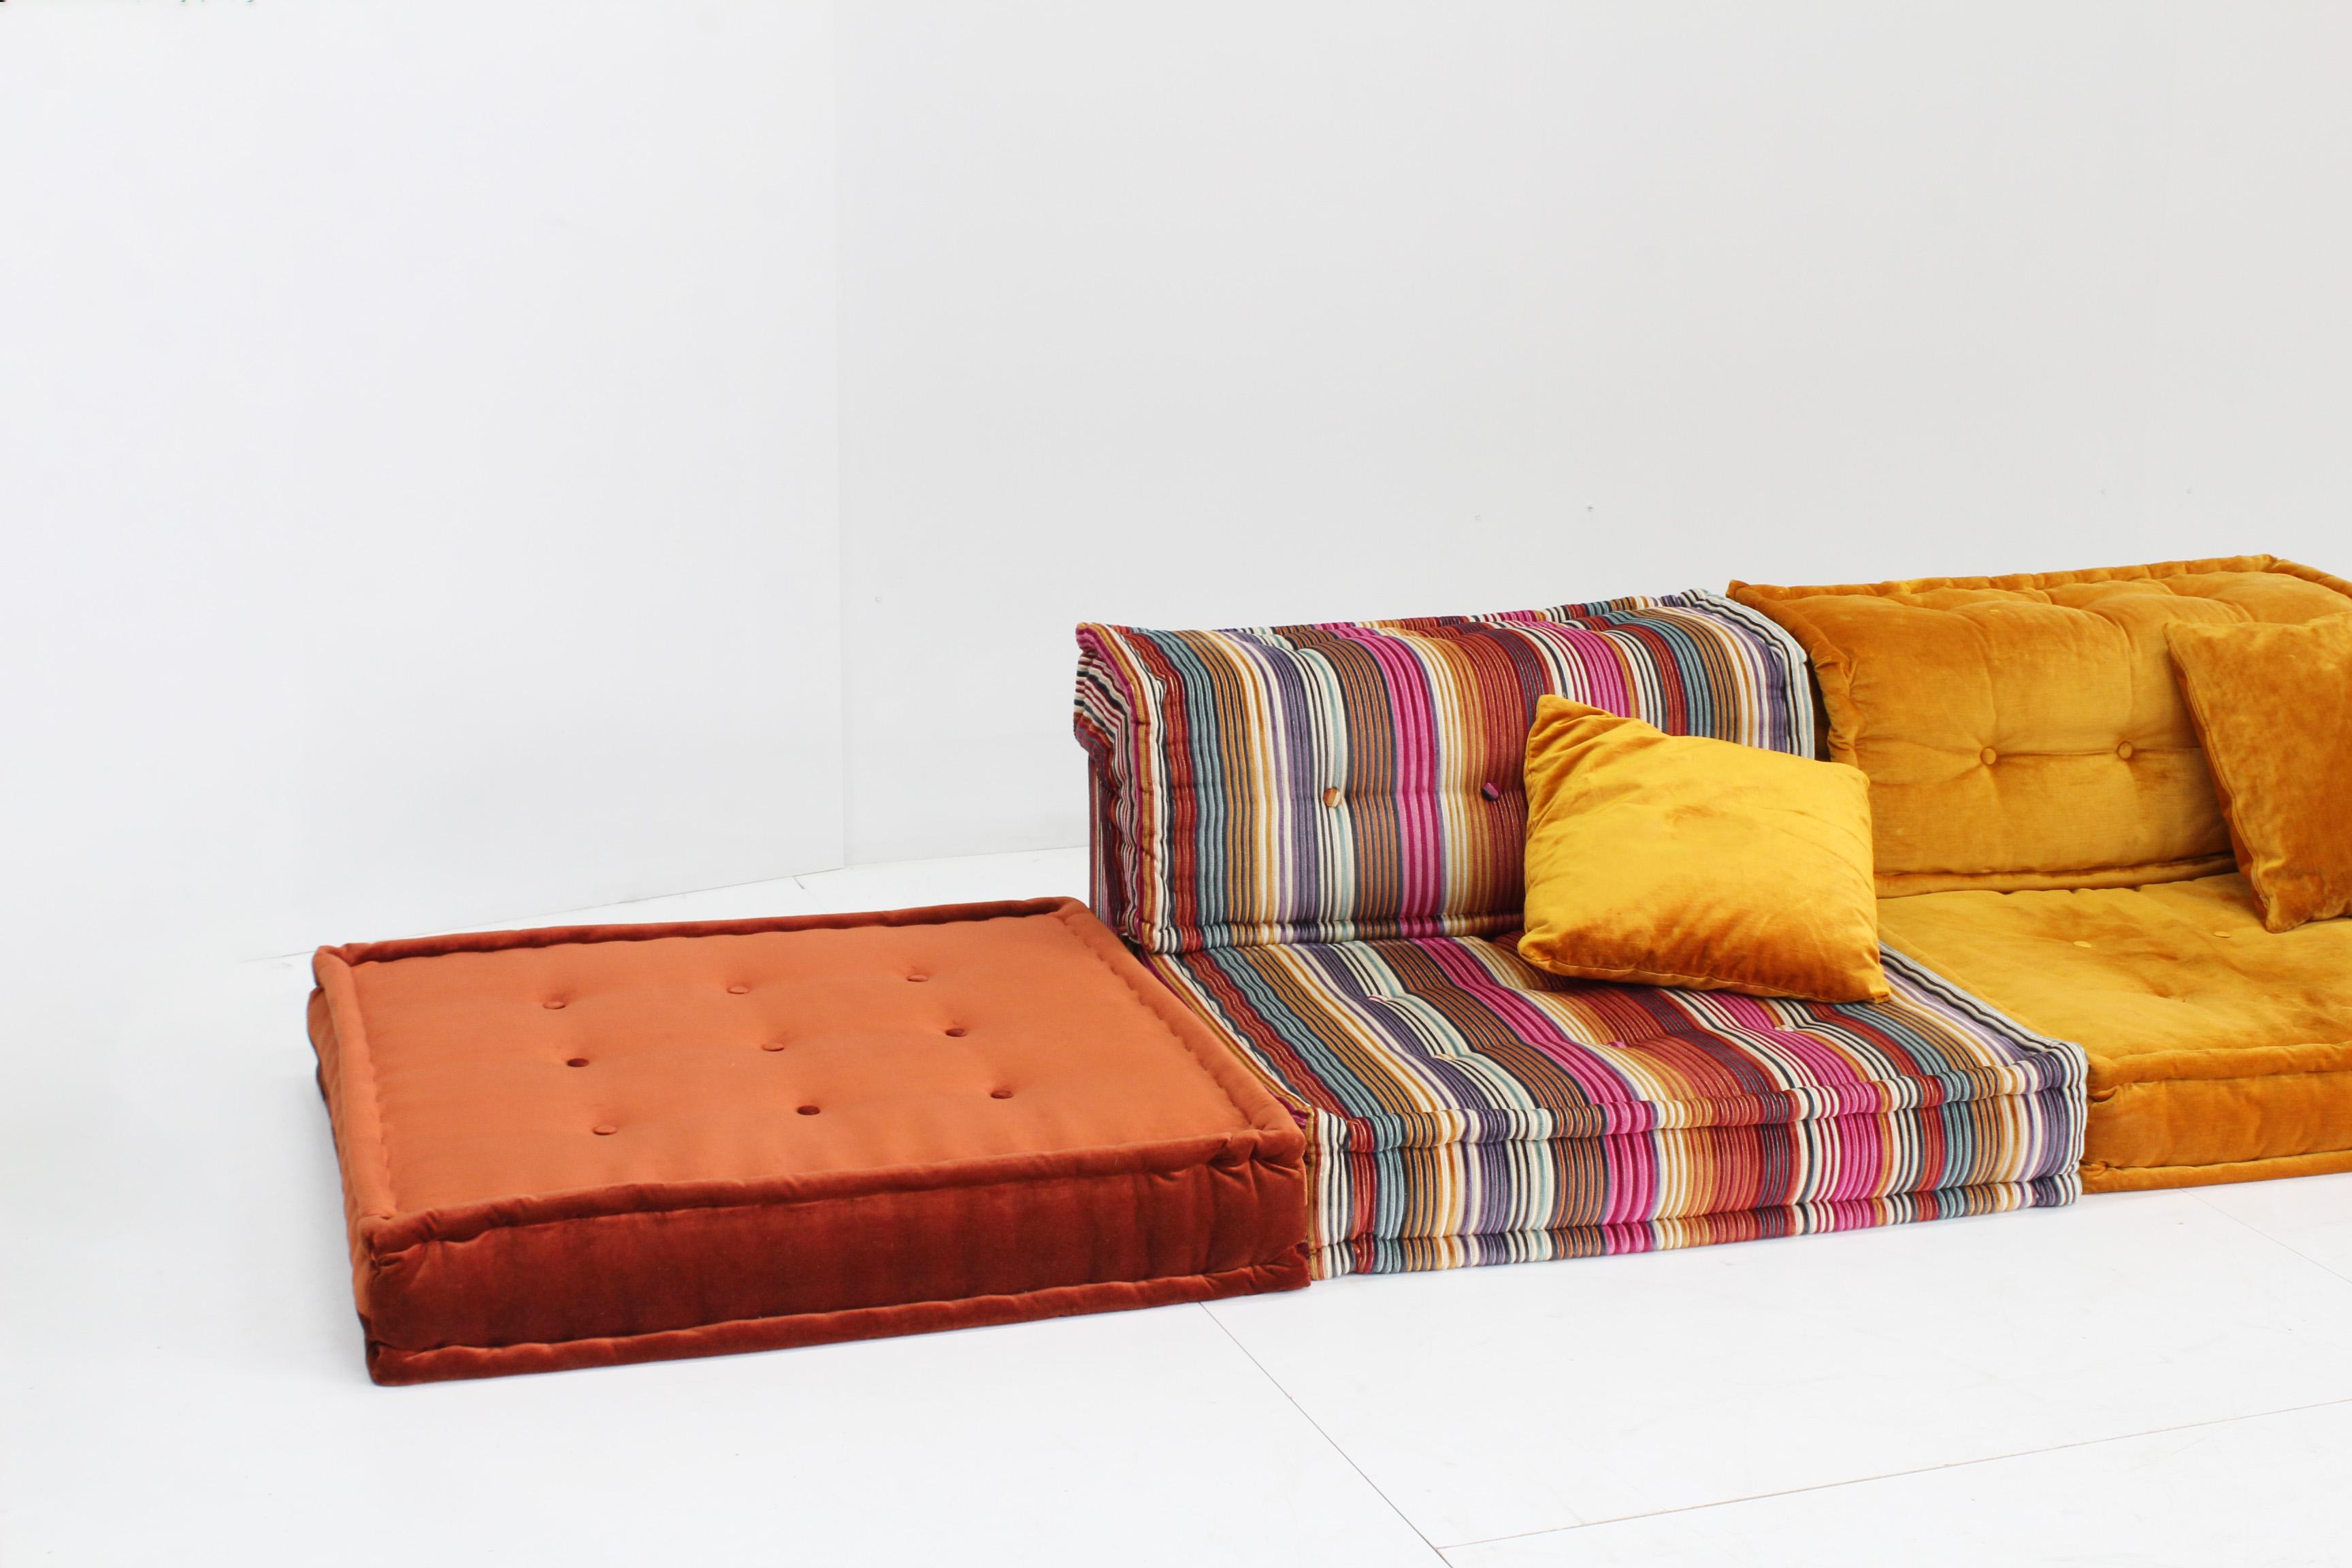 Roche Bobois Mah Jong sofa Missoni design by Hans Hopfer 
 
Roche Bobois Mah jong sofa consiting of 8 pieces of whom partially in Missoni fabric designed in 1971 by Hans Hopfer. A modular design sofa with unlimited options which can be altered to